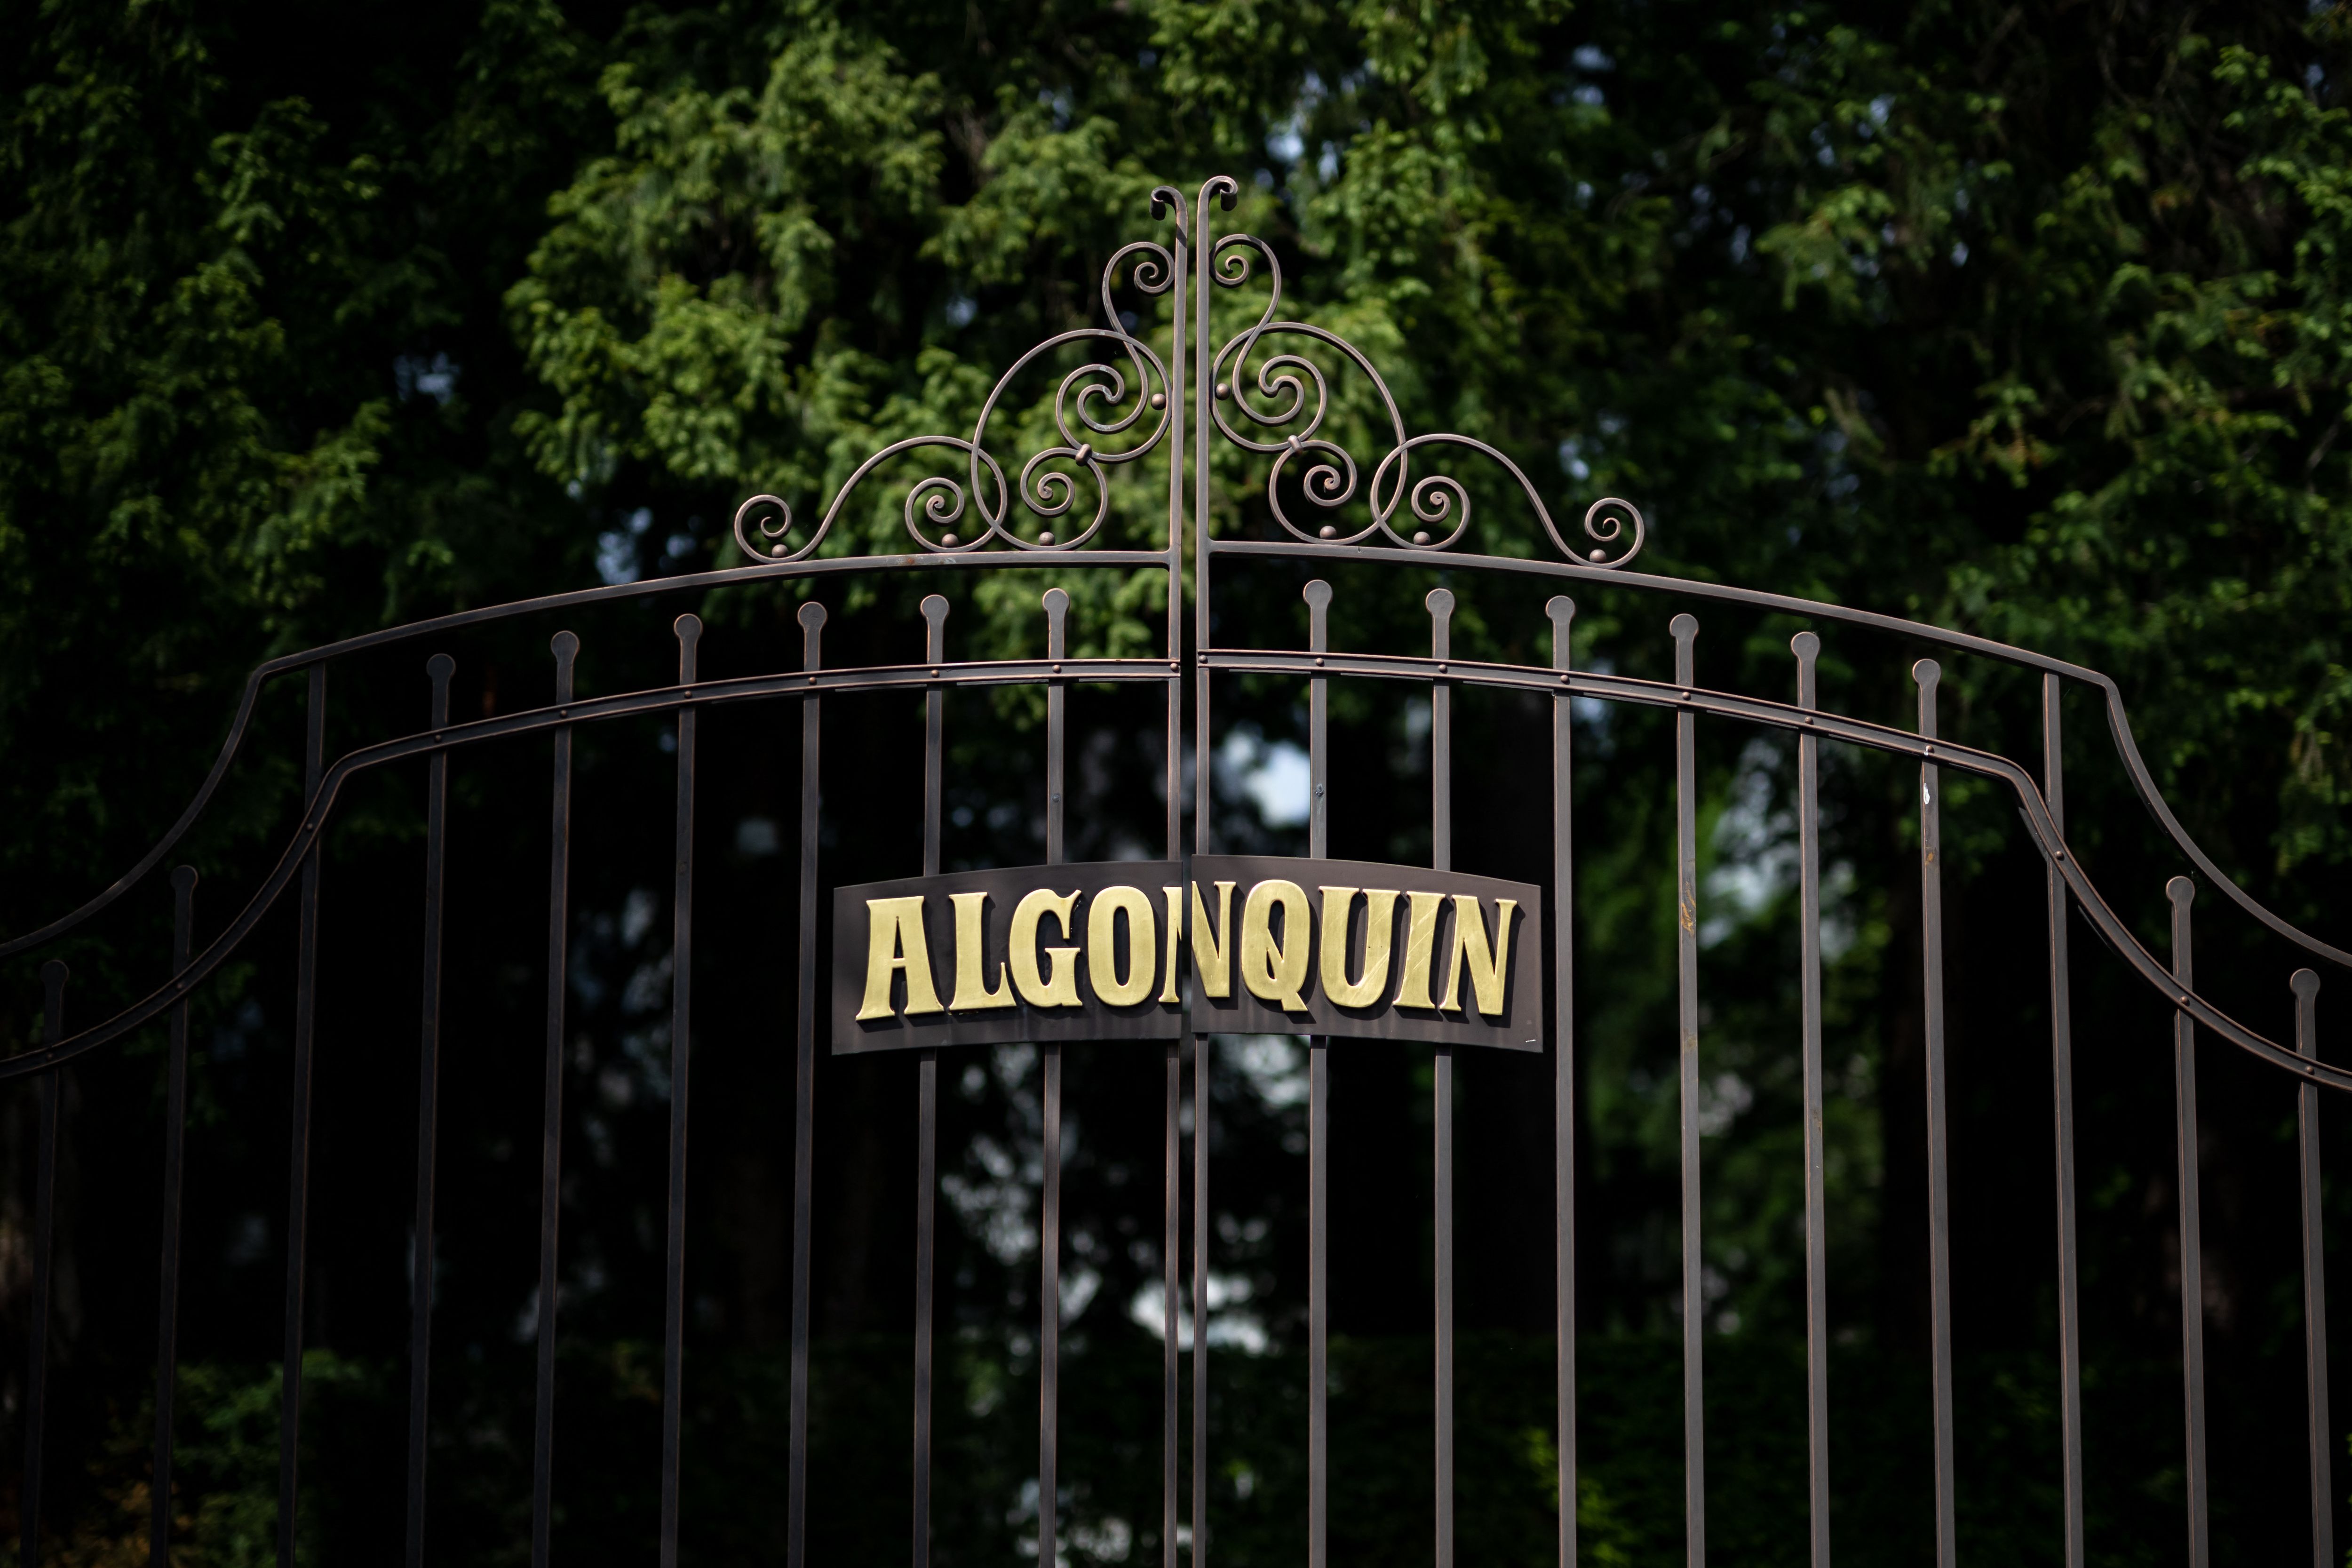 The gate of Chateau Algonquin, Turner's home in Switzerland | Source: Getty Images